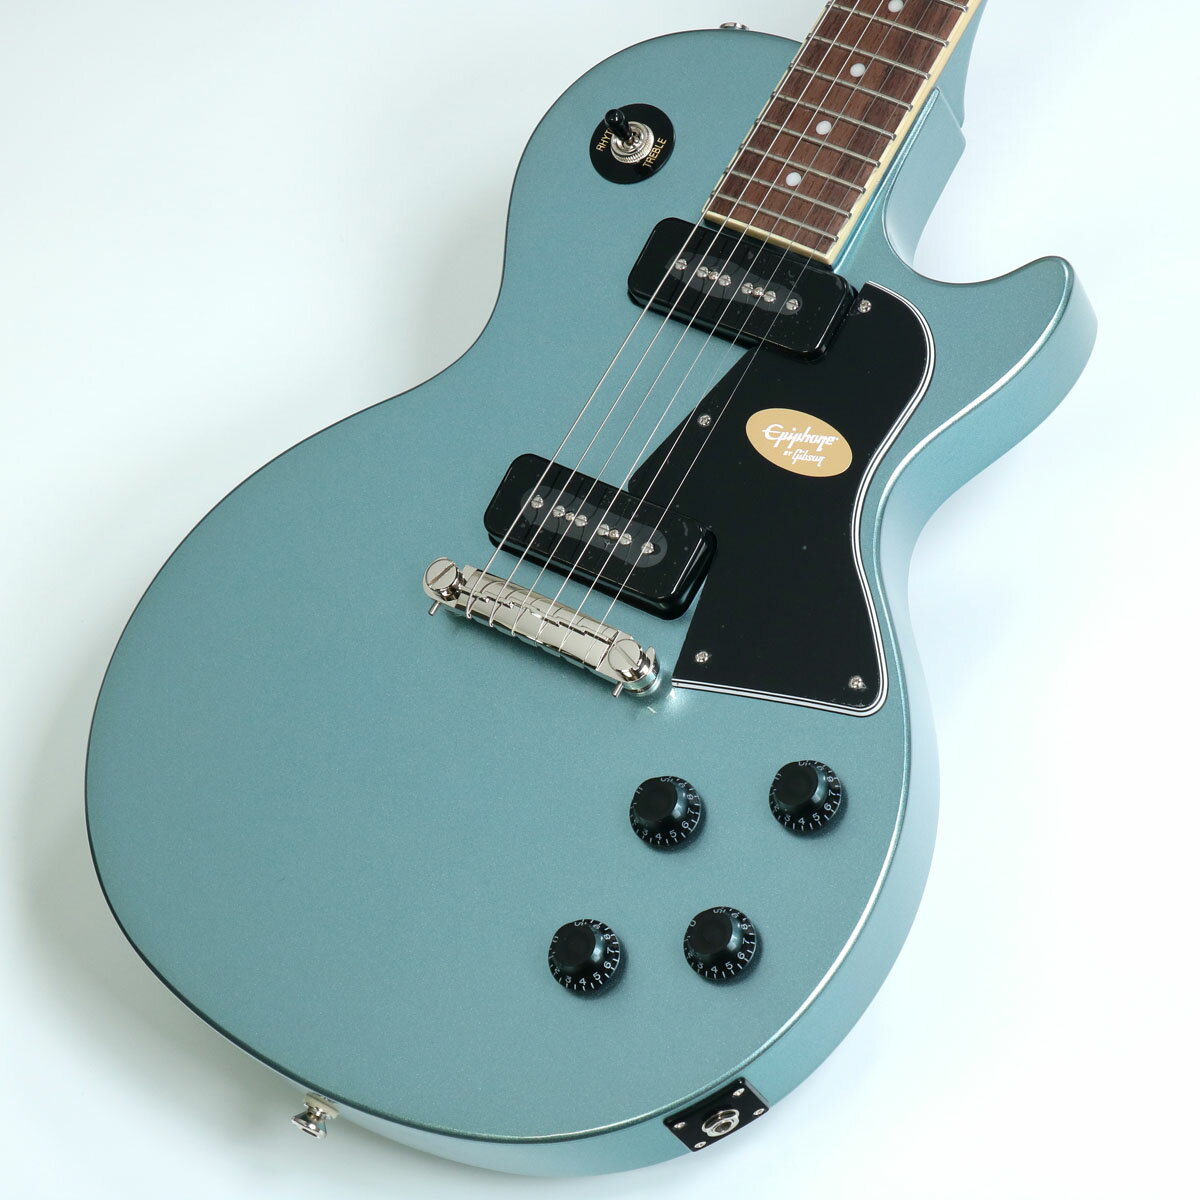 Epiphone / Inspired by Gibson Les Paul Special Pelham Blue [Exclusive Model] GstHs+4582600680067ts+8802022379629tyYRKz